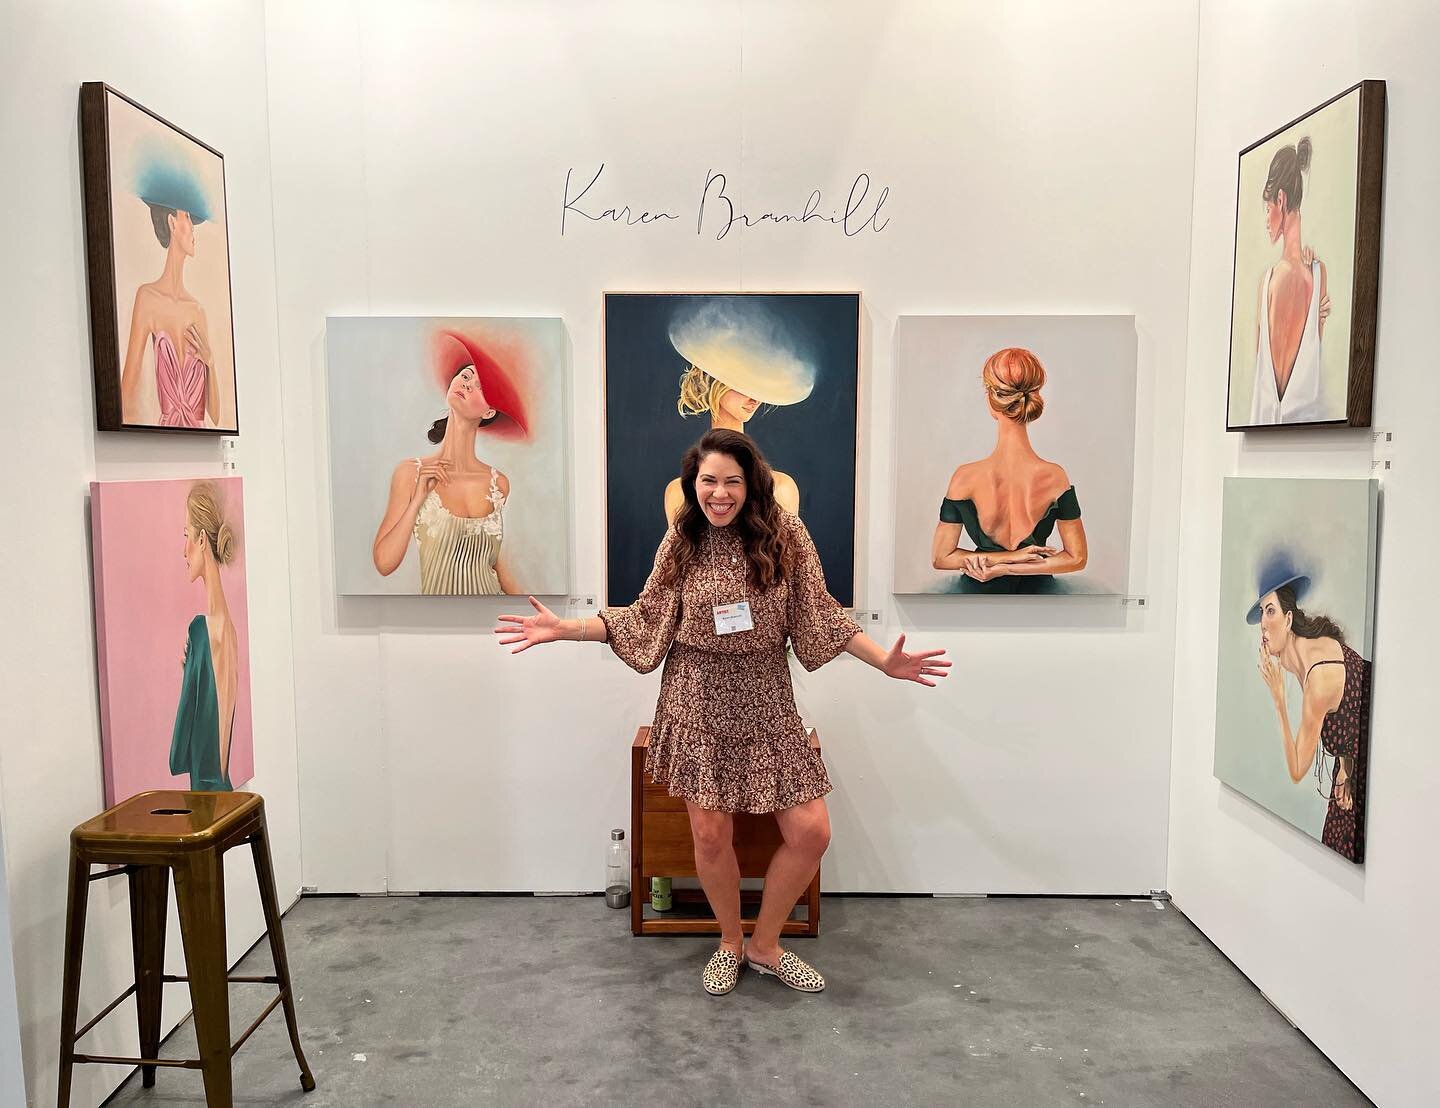 Opening night was a blast 💥 Booth 708 @artistprojectto - come visit me, I&rsquo;ll be here all weekend until 6pm Sunday! 

My cup runneth over - what pure joy it is to meet new friends, talk about art, life and everything in between. 
💛💛💛💛💛💛
.